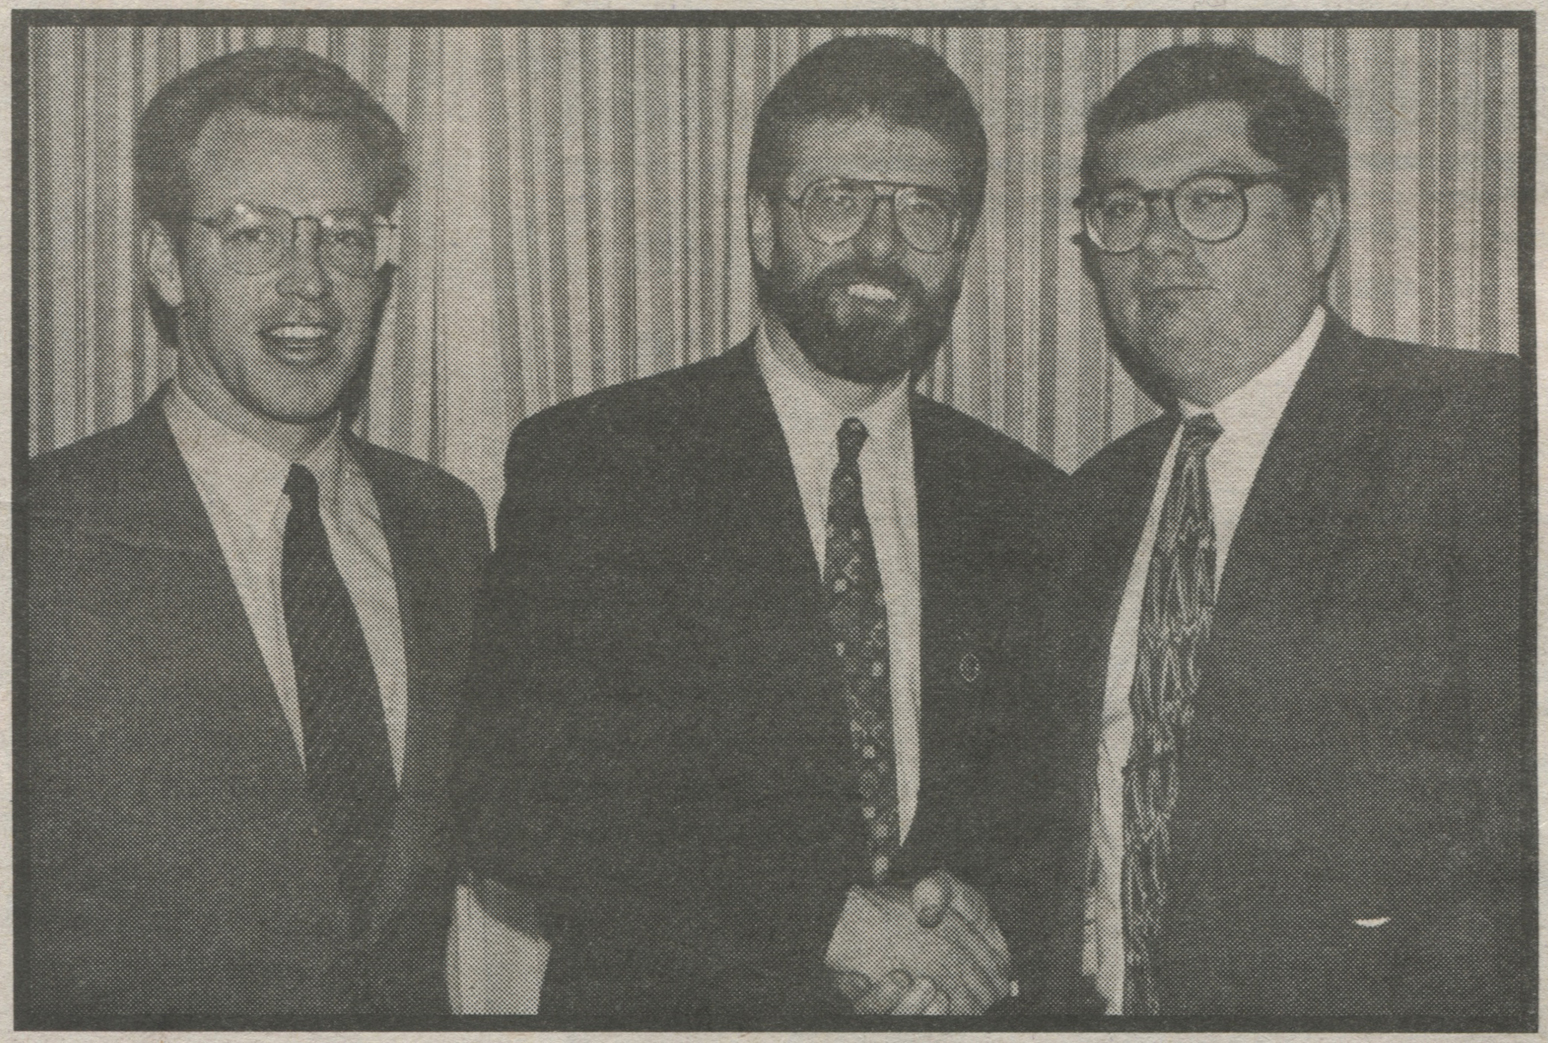 Bill Lenahan (left) and Joe Jamison (right) with Gerry Adams in 1994. (Irish Voice)